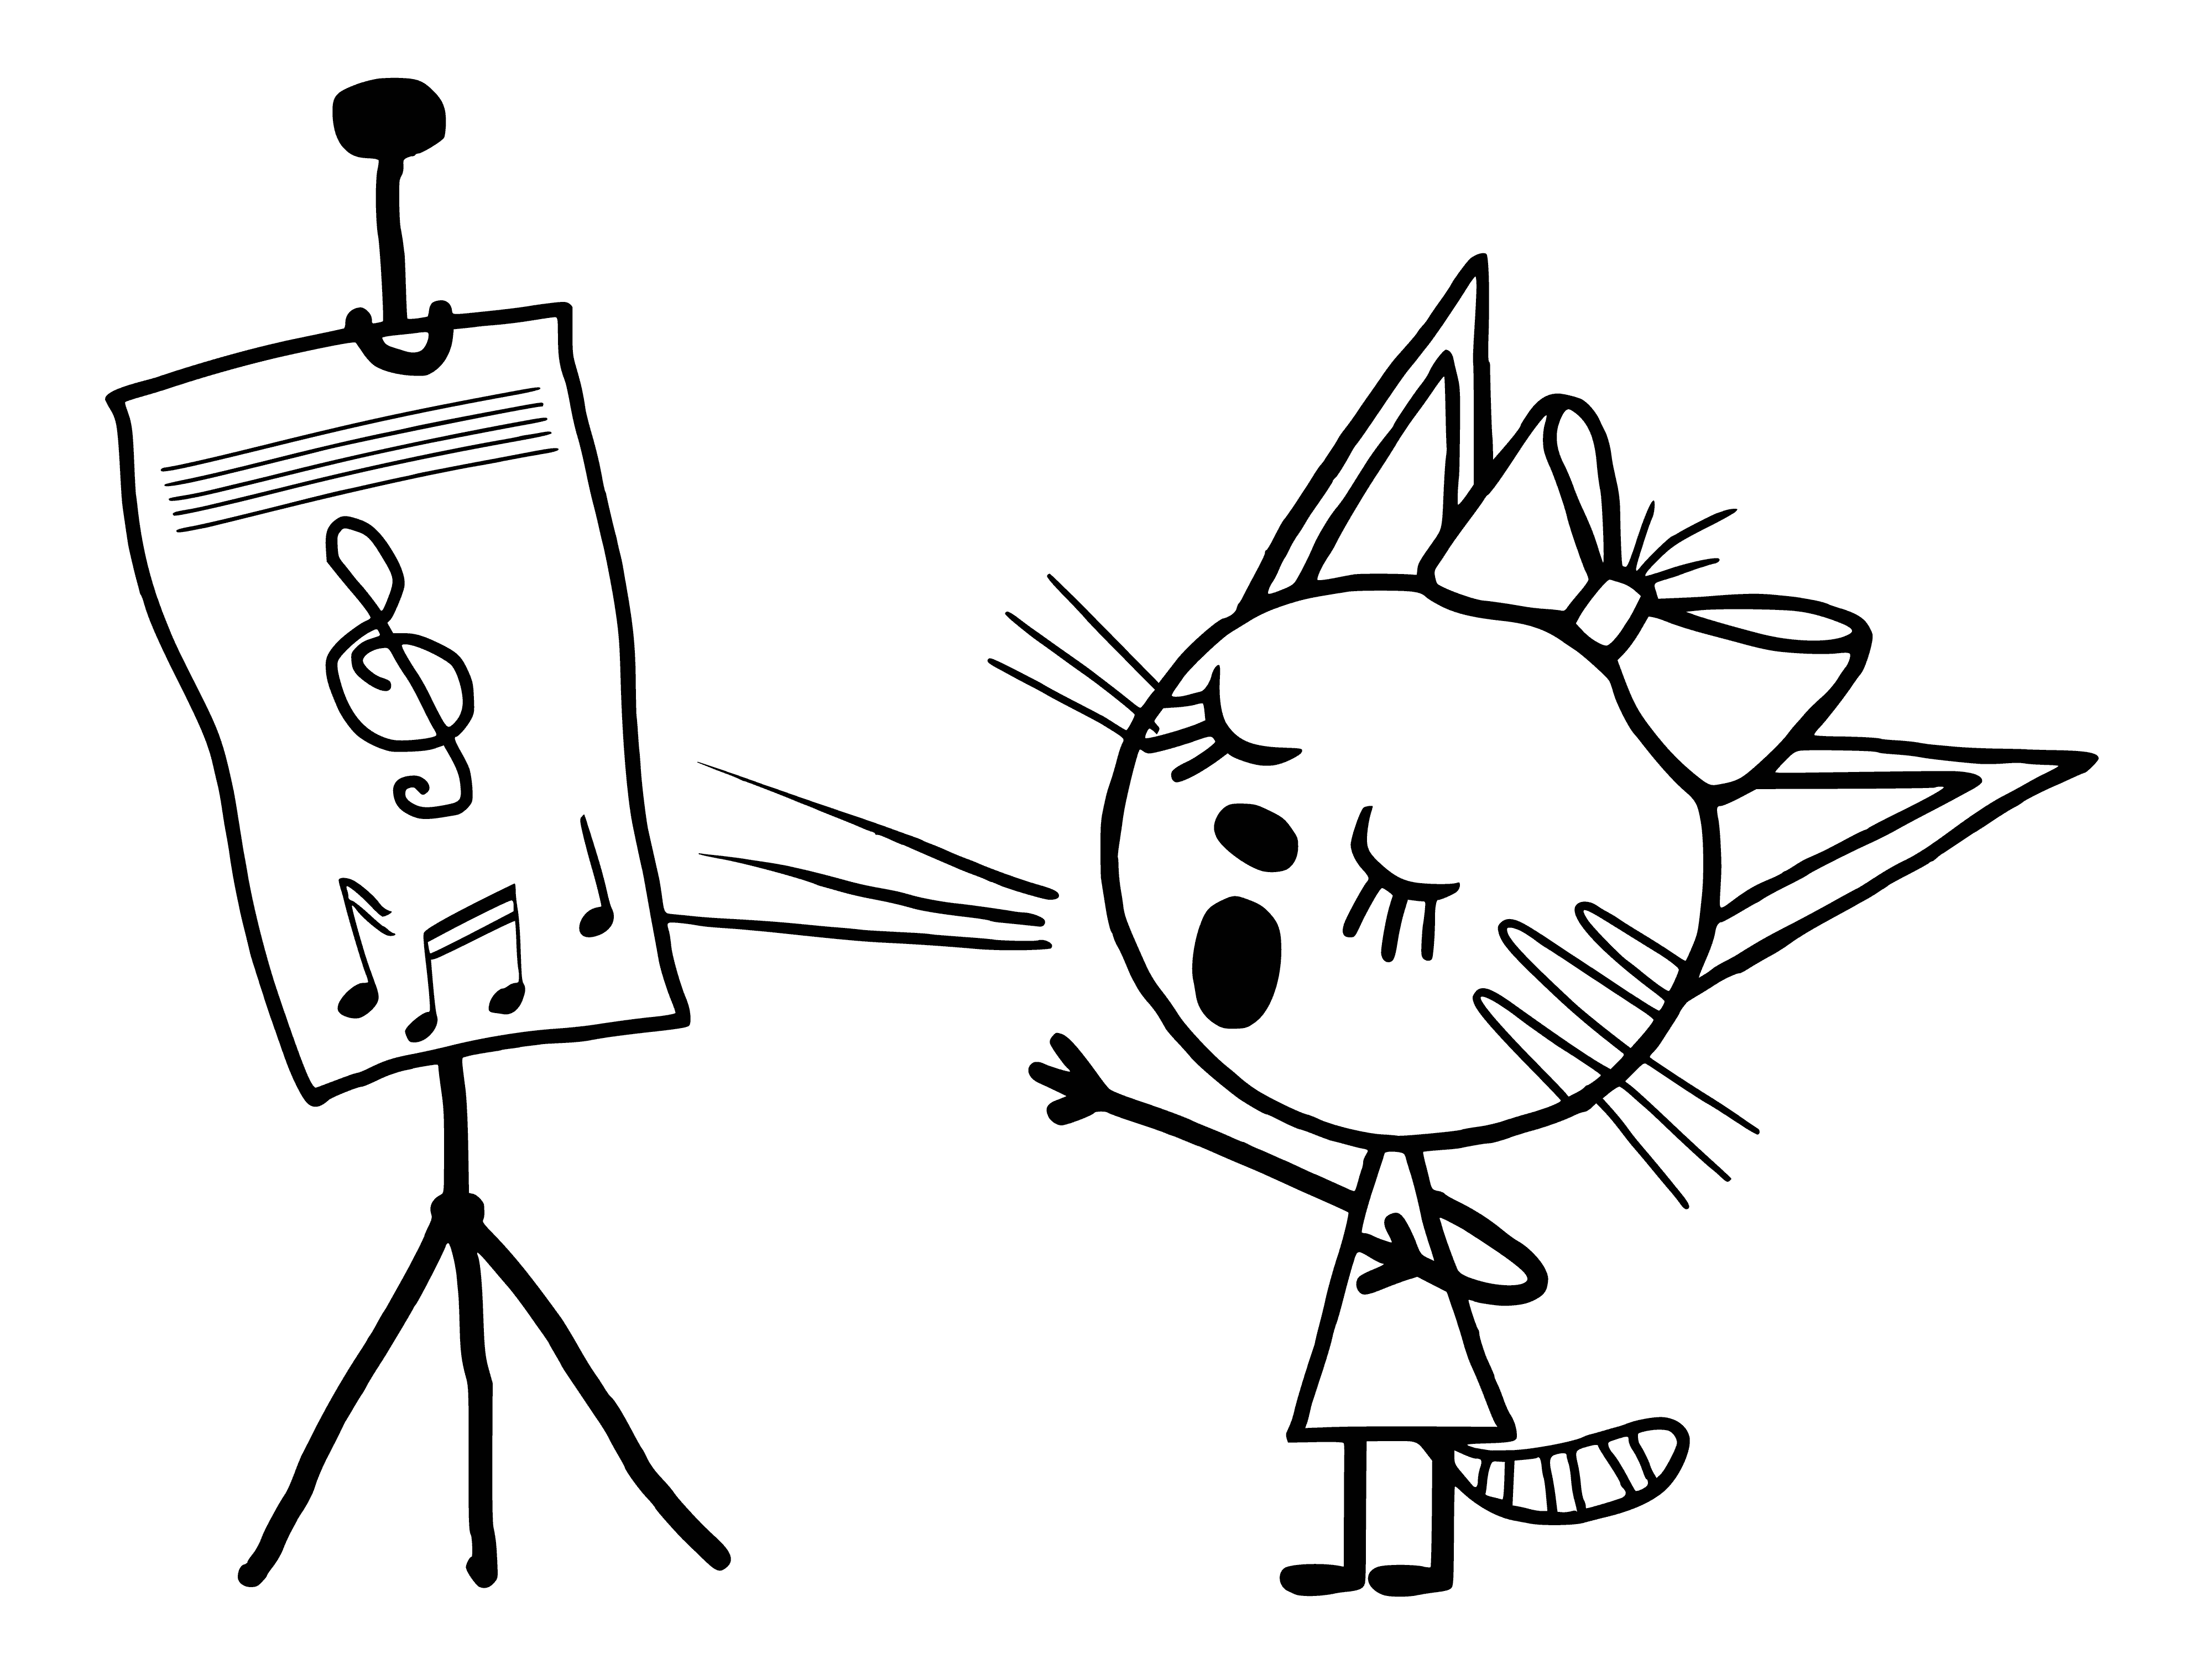 coloring page: 3 cats sing to 3 instruments, gray facing black, black facing white.